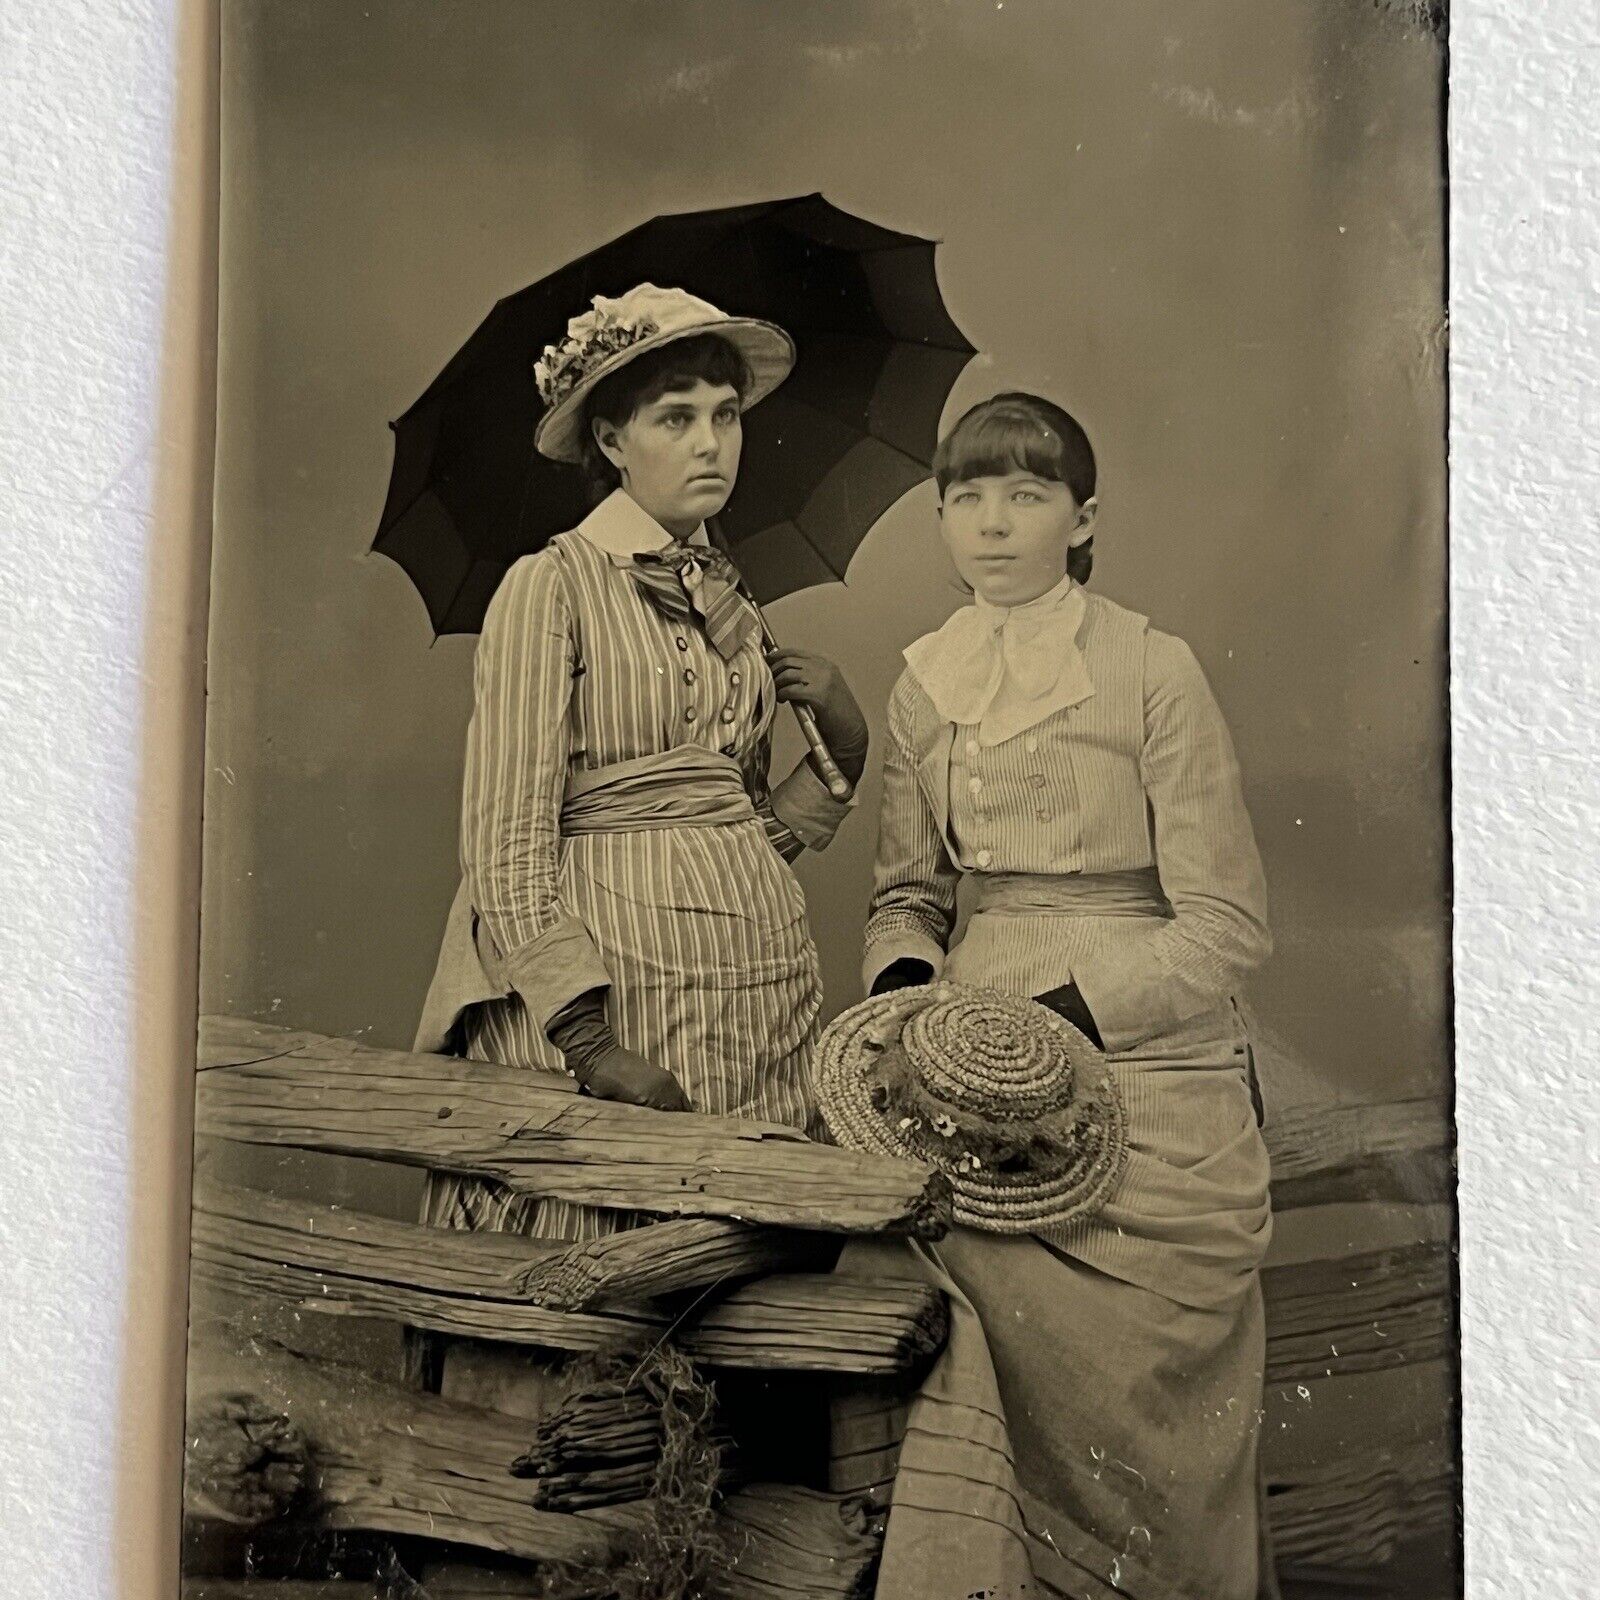 Antique Tintype Photograph Beautiful Affluent Young Women One Pregnant? Parasol